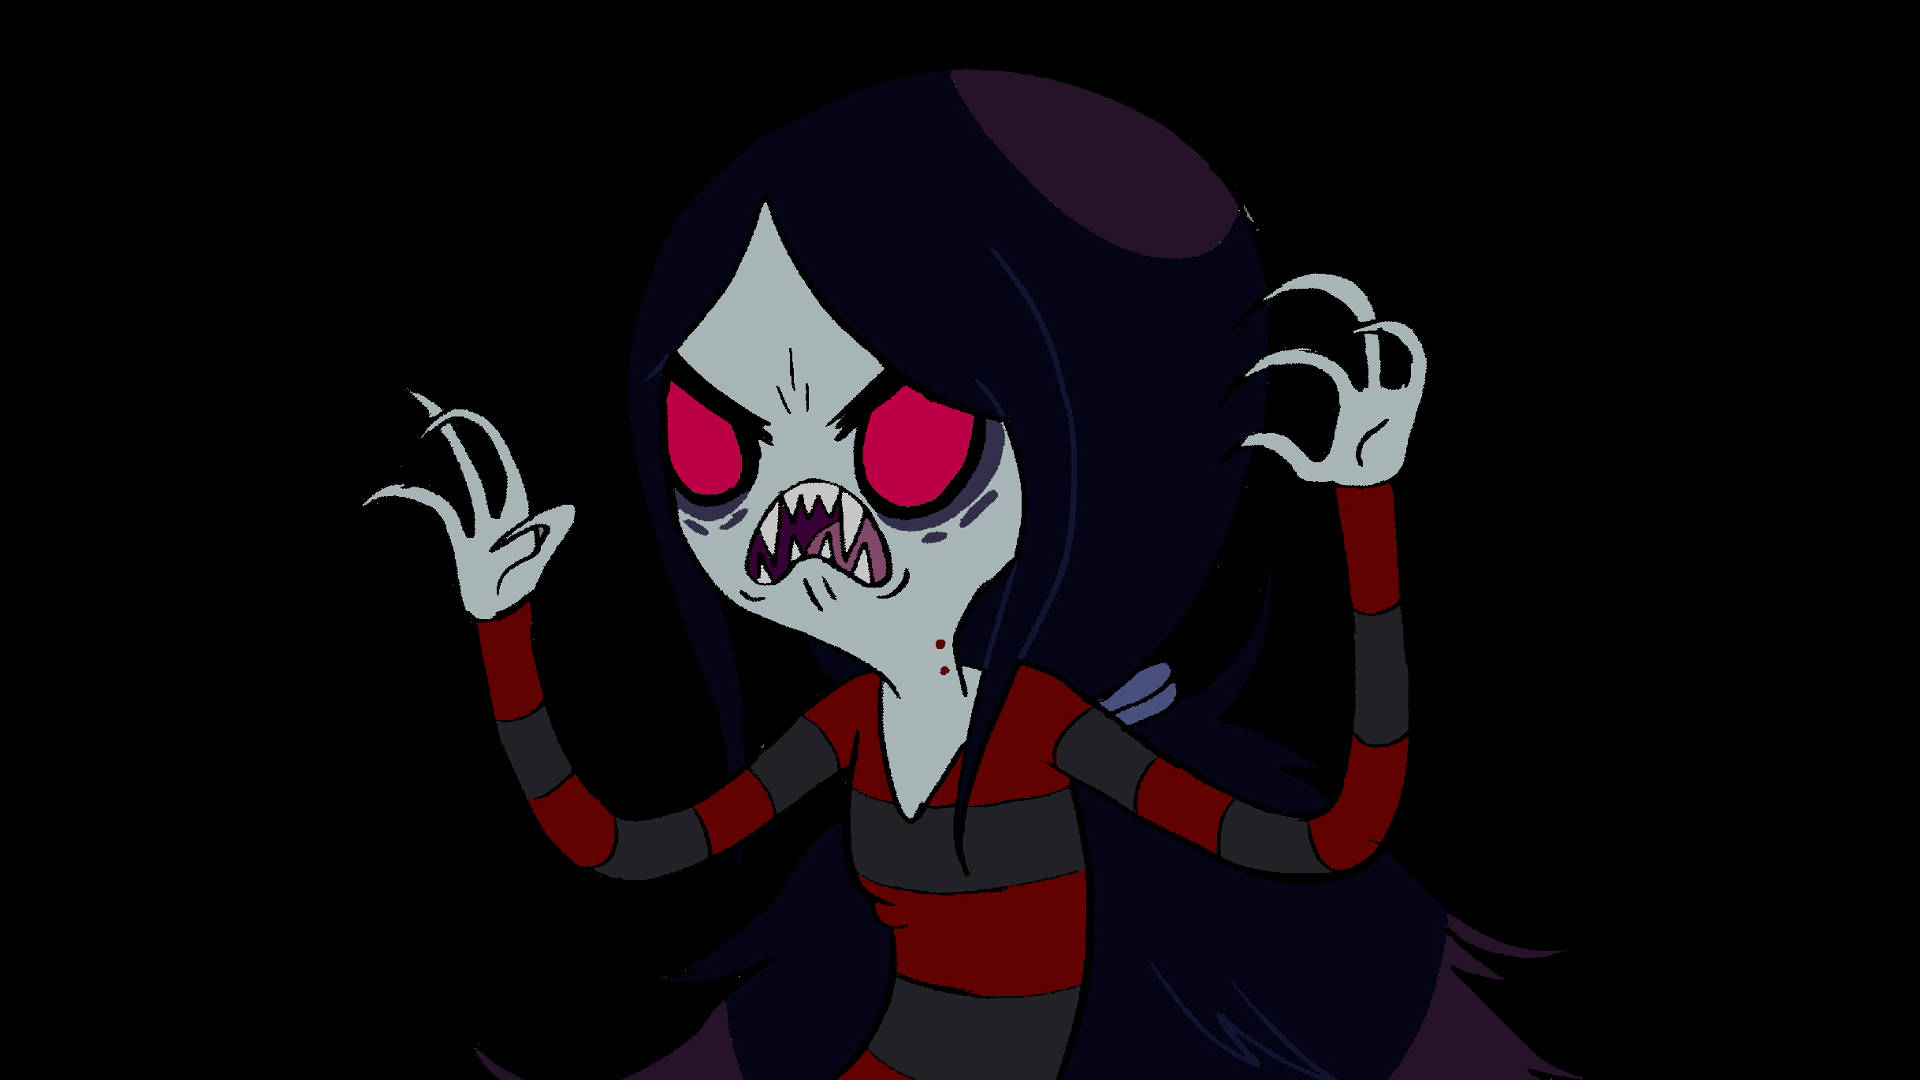 Scary Angry Vampire Queen Marceline Wallpaper